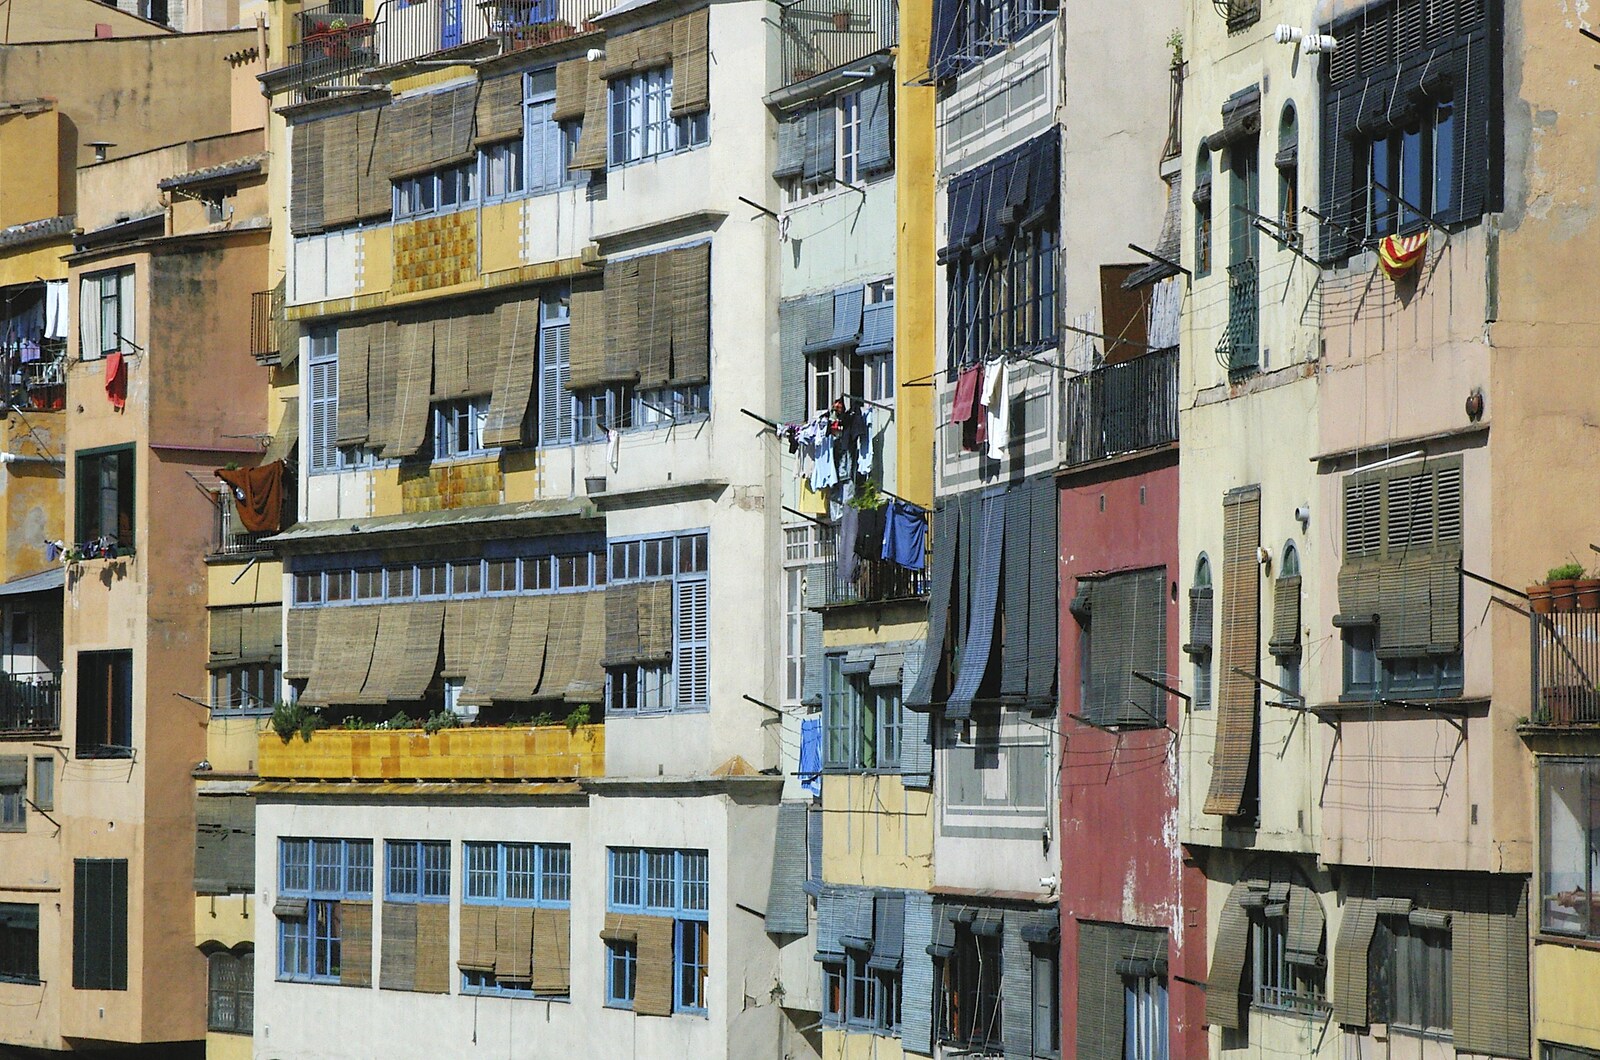 More packed-in apartments from Girona, Catalunya, Spain - 17th September 2006